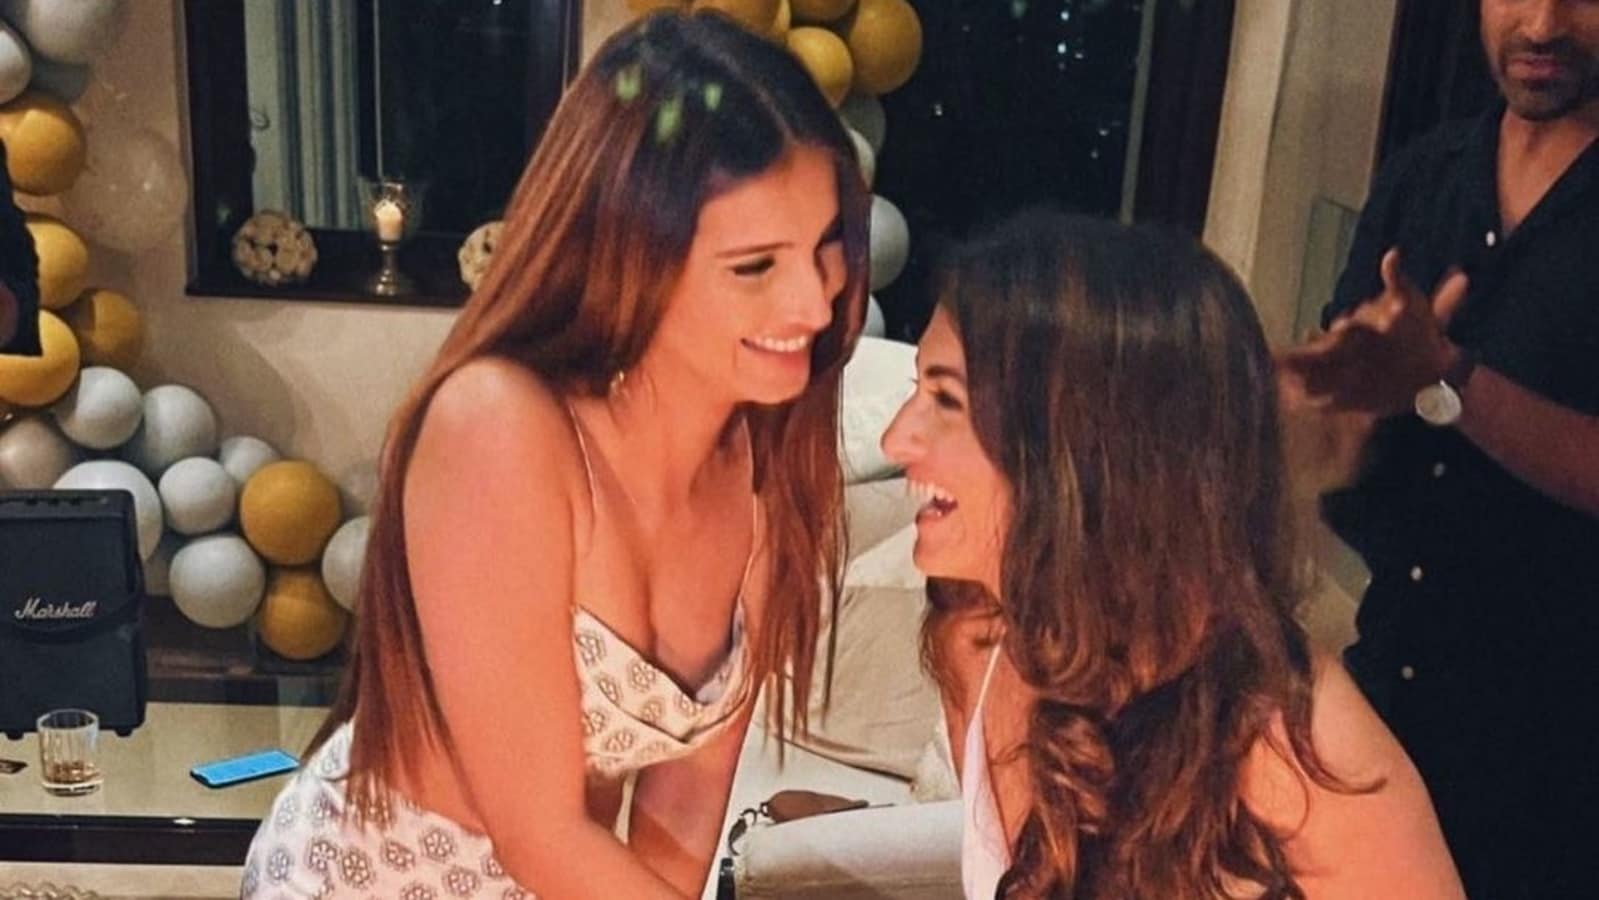 Tara Sutaria can't stop laughing as she cuts birthday cake with ...